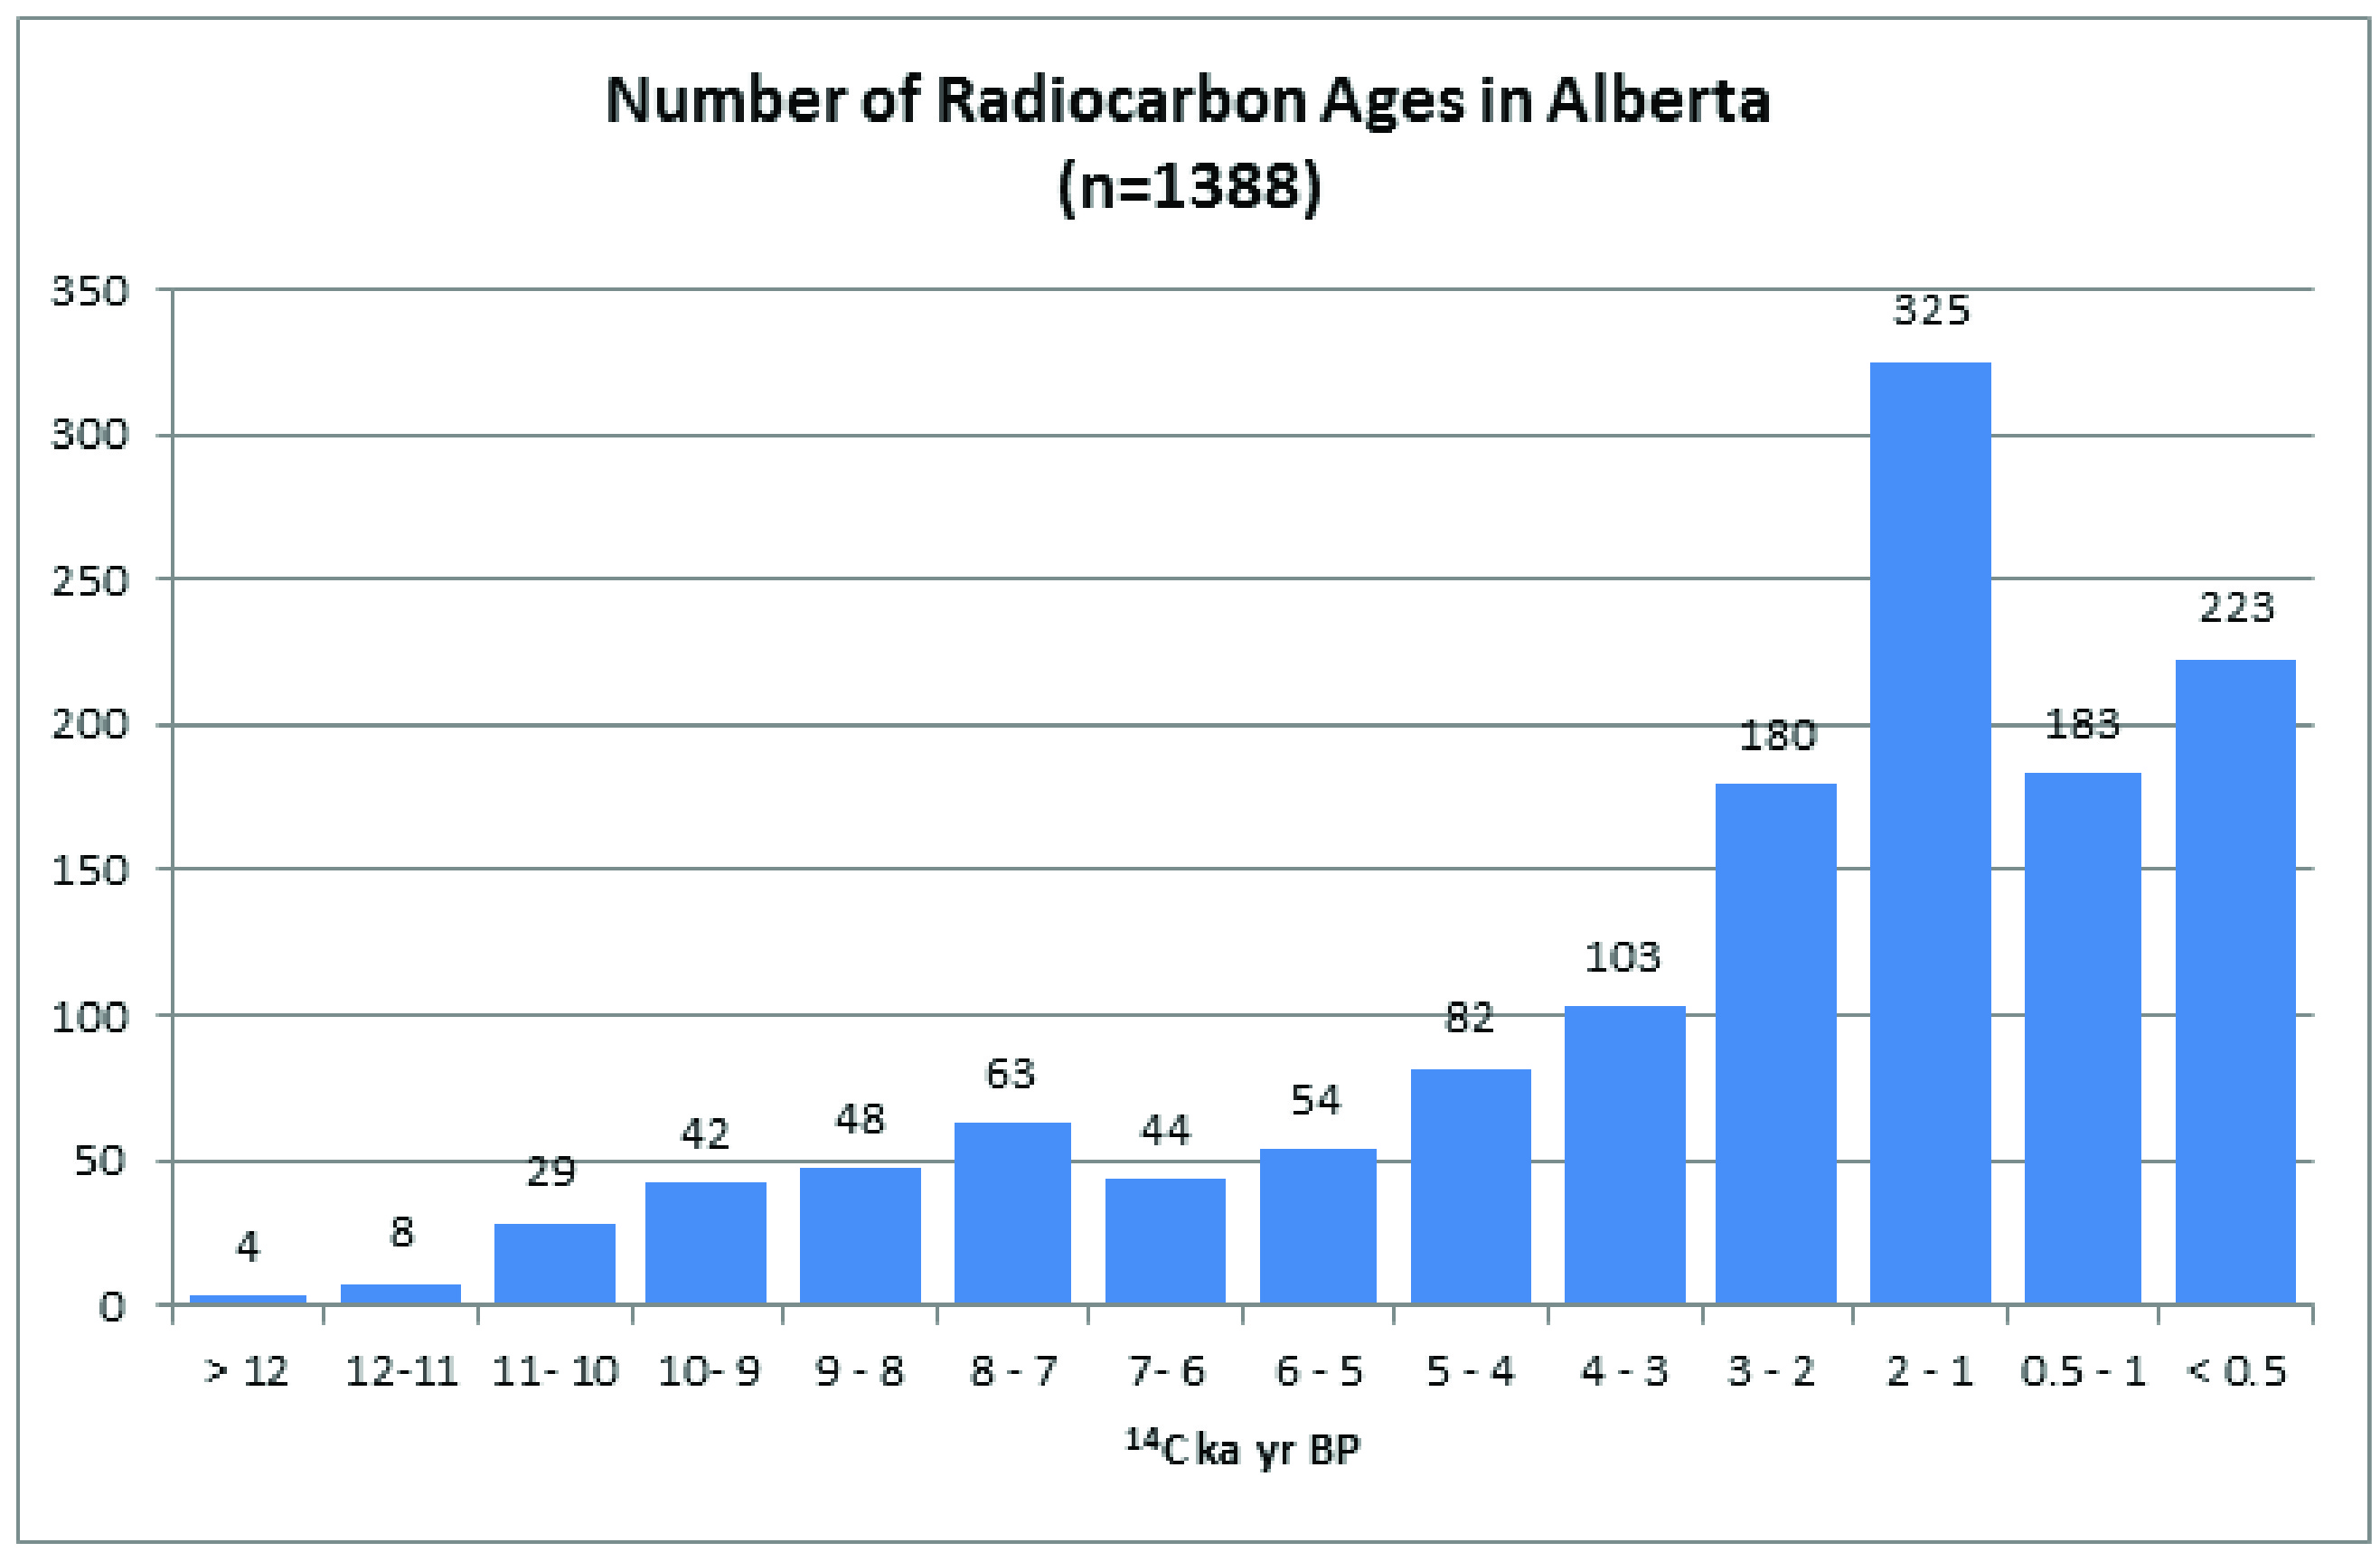 Alberta archaeological sites dating between 10,000-12,000+ radiocarbon  years before present.